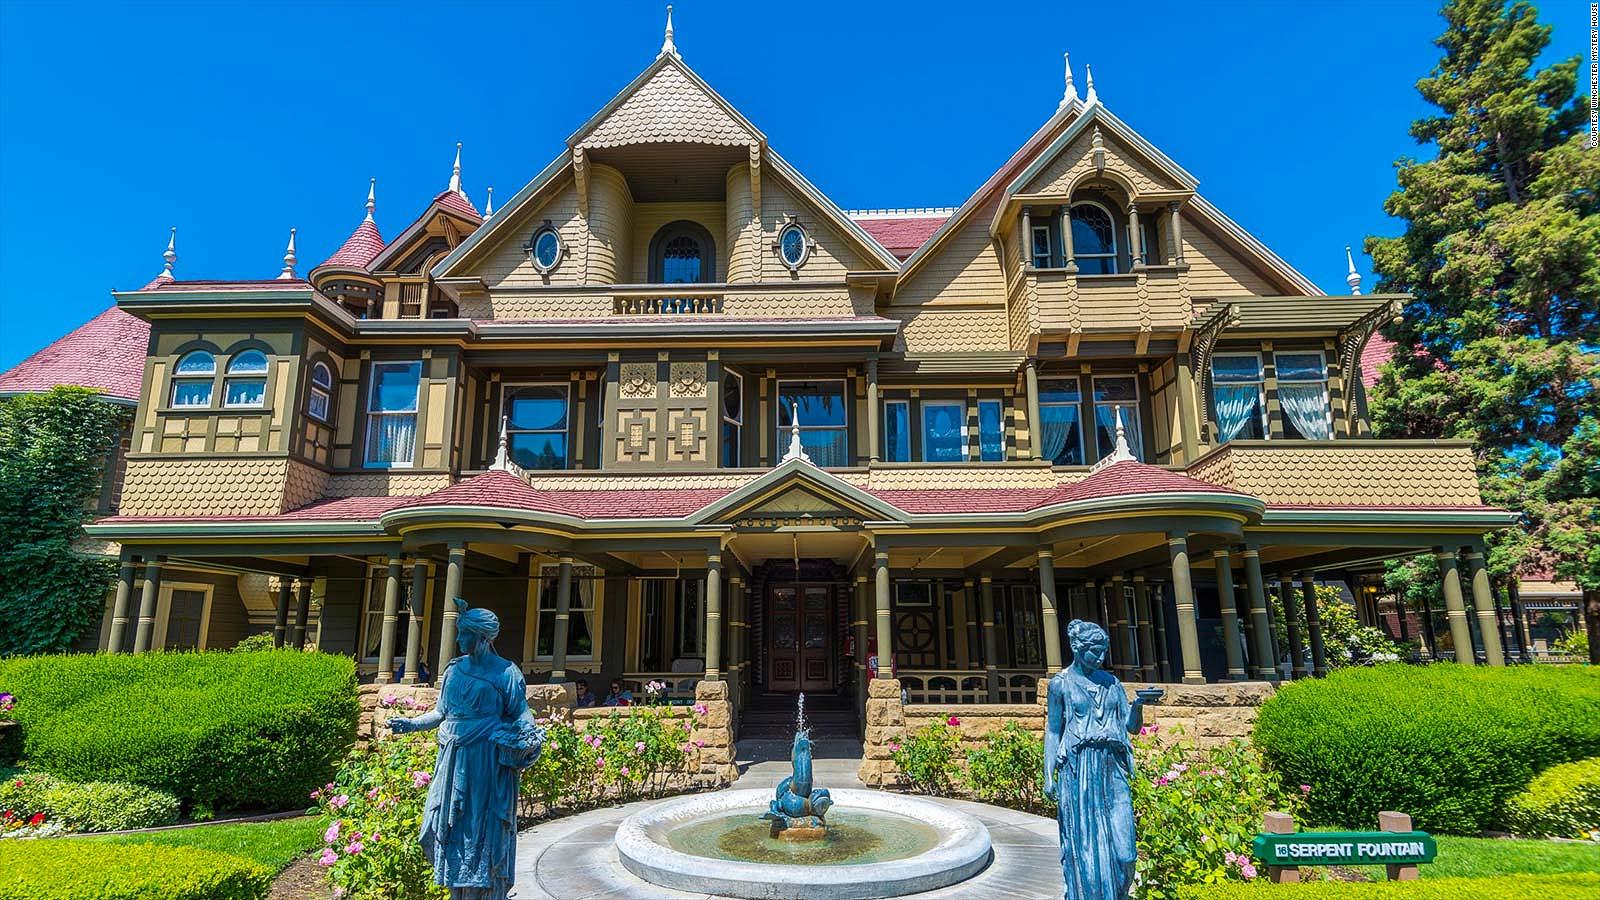 Winchester Mystery House: Dare you uncover its secrets? | CNN Travel